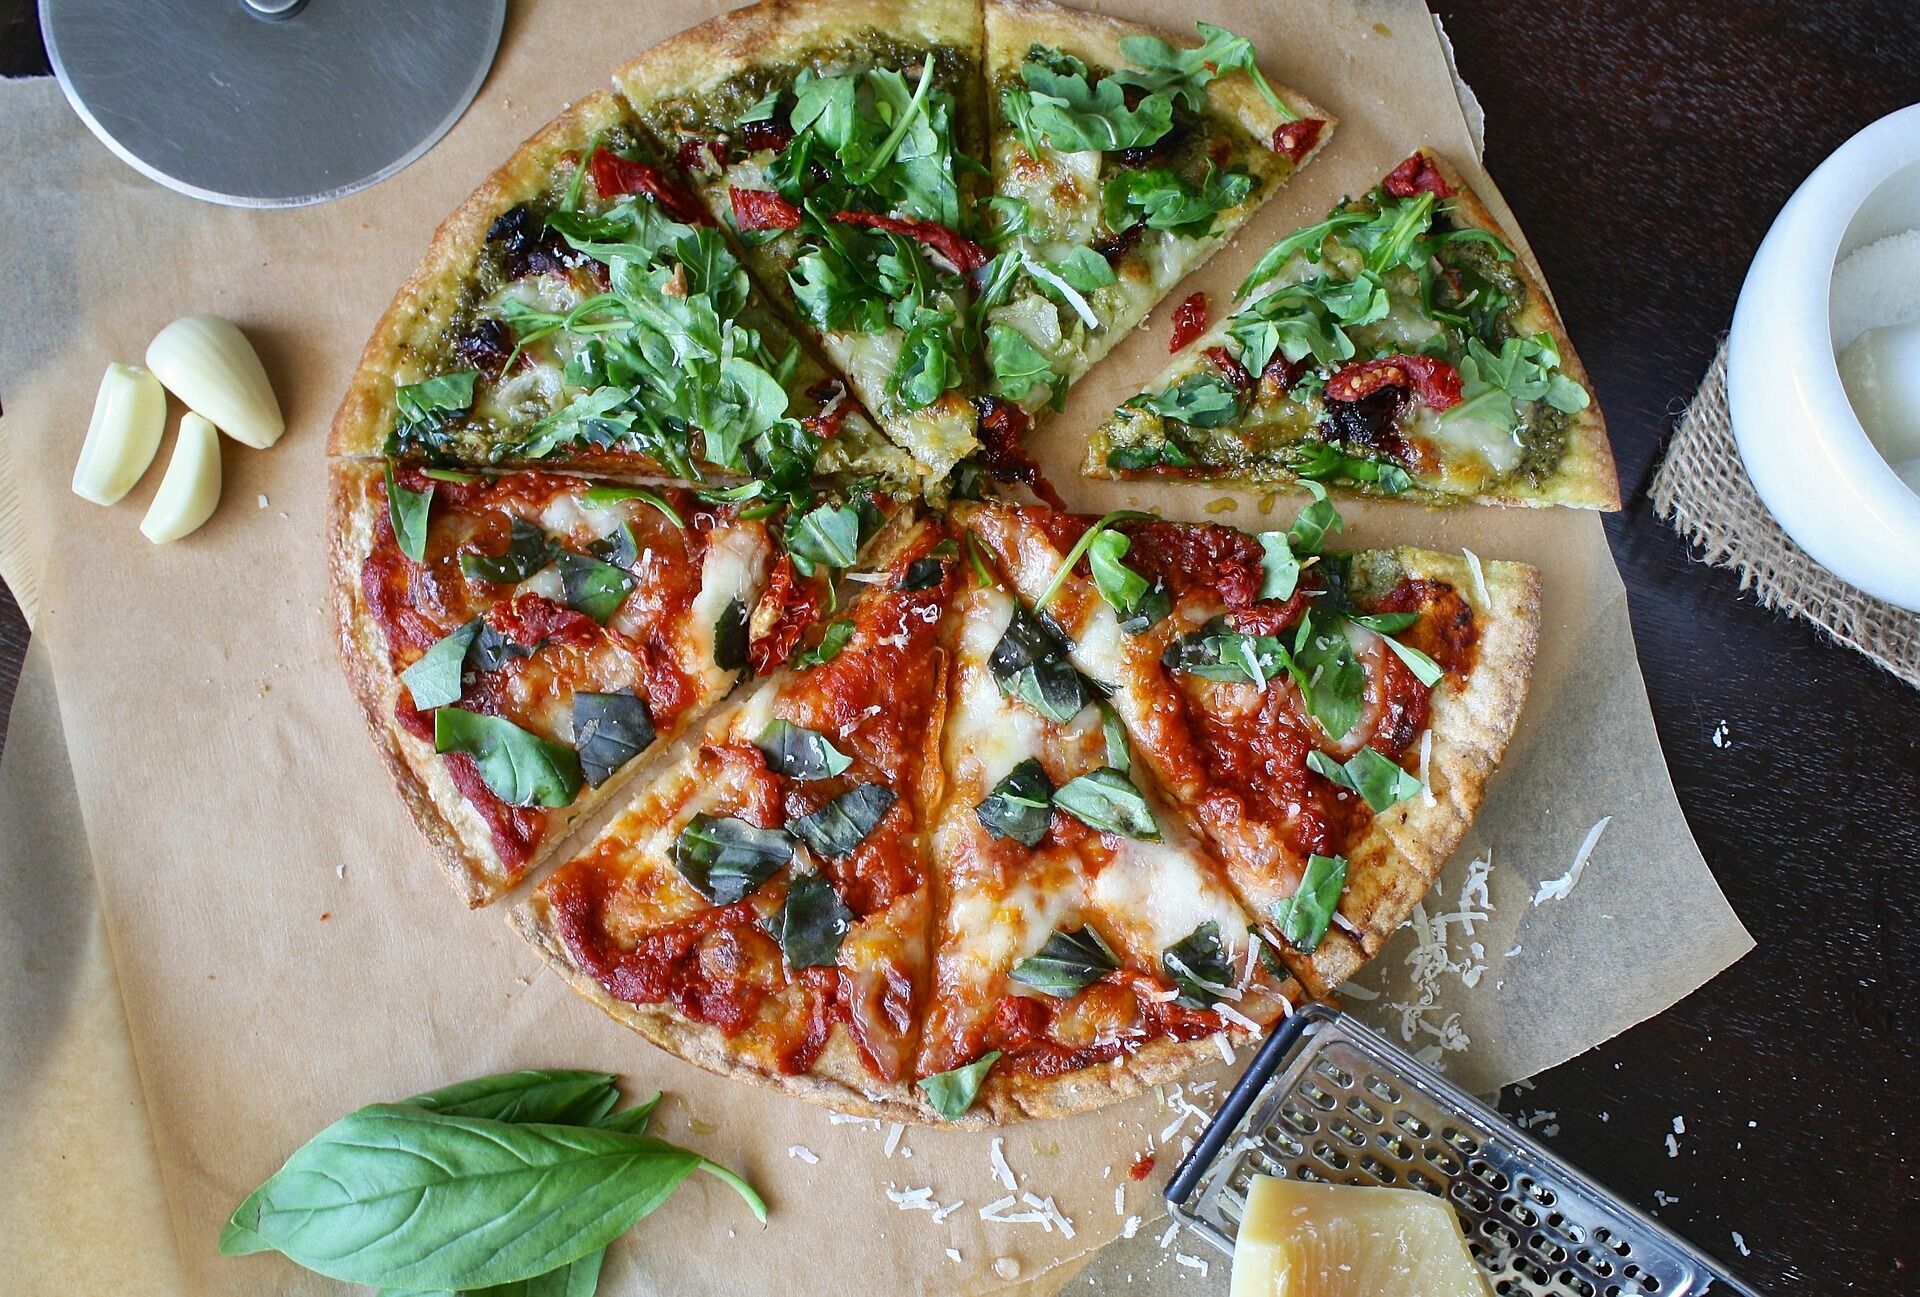 You can add herbs and garlic to pizza to add even more flavor